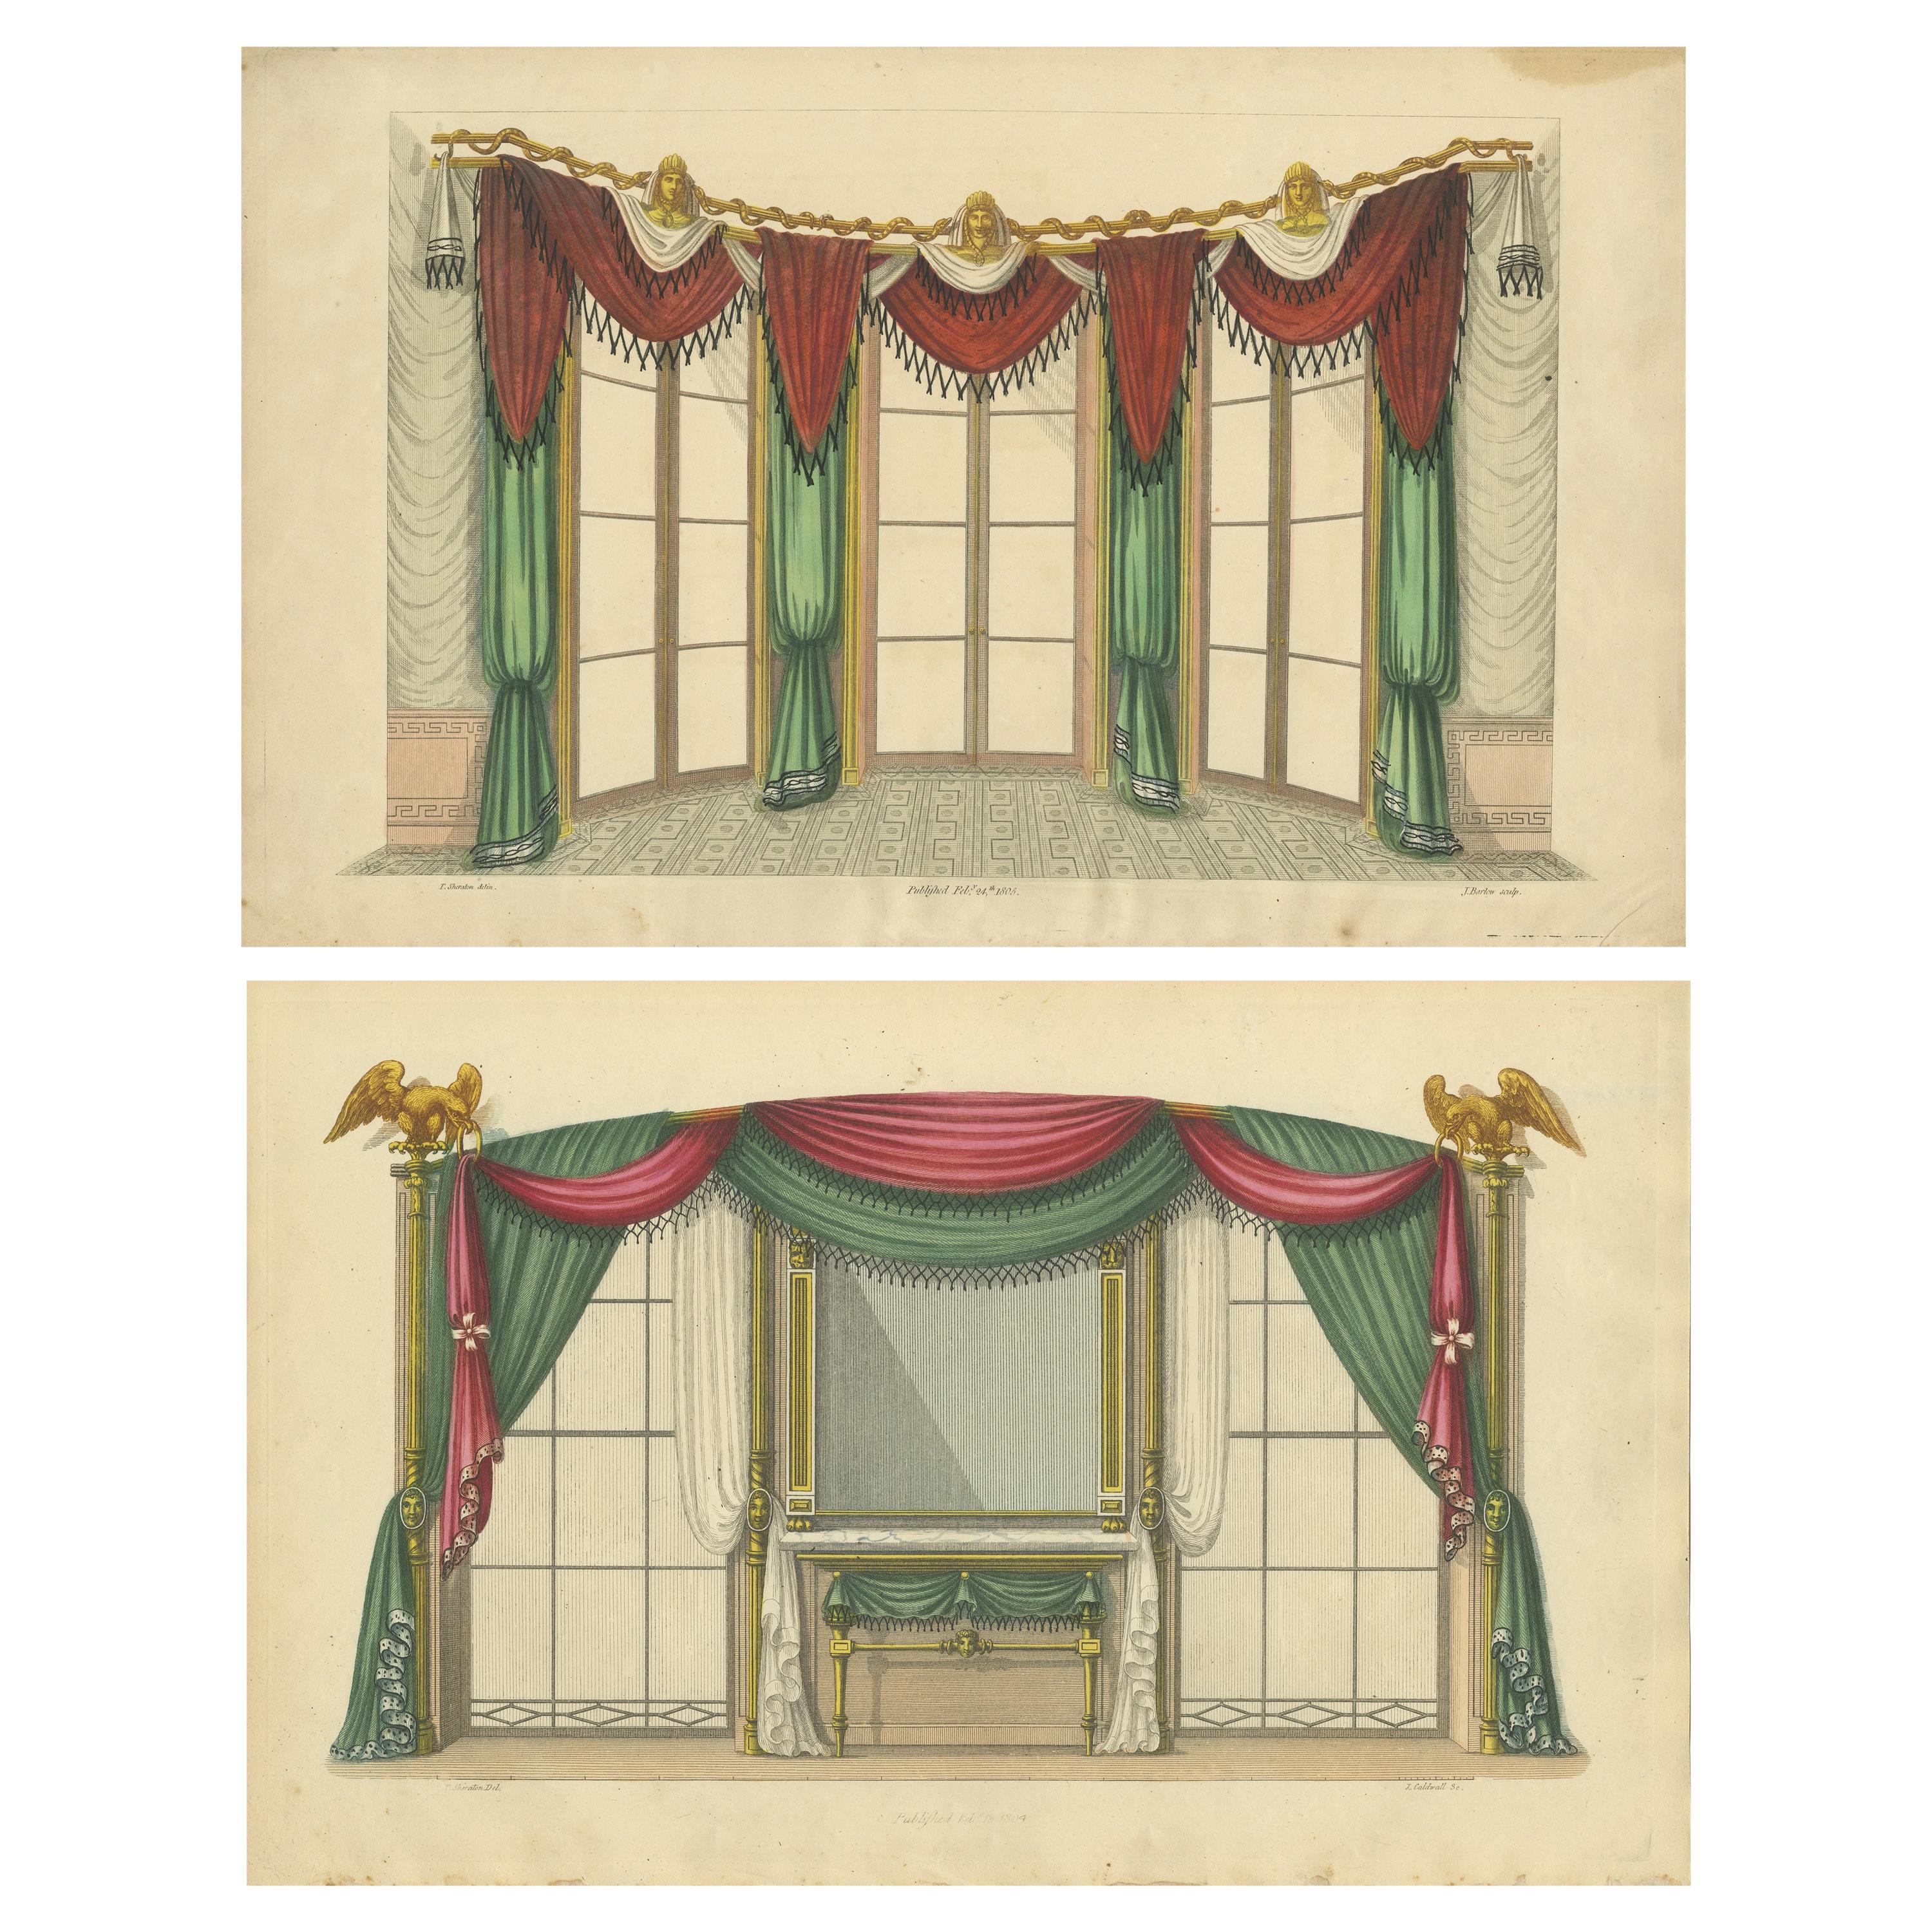 Set of 2 Antique Prints of Windows and Drapery by Sheraton '1805'